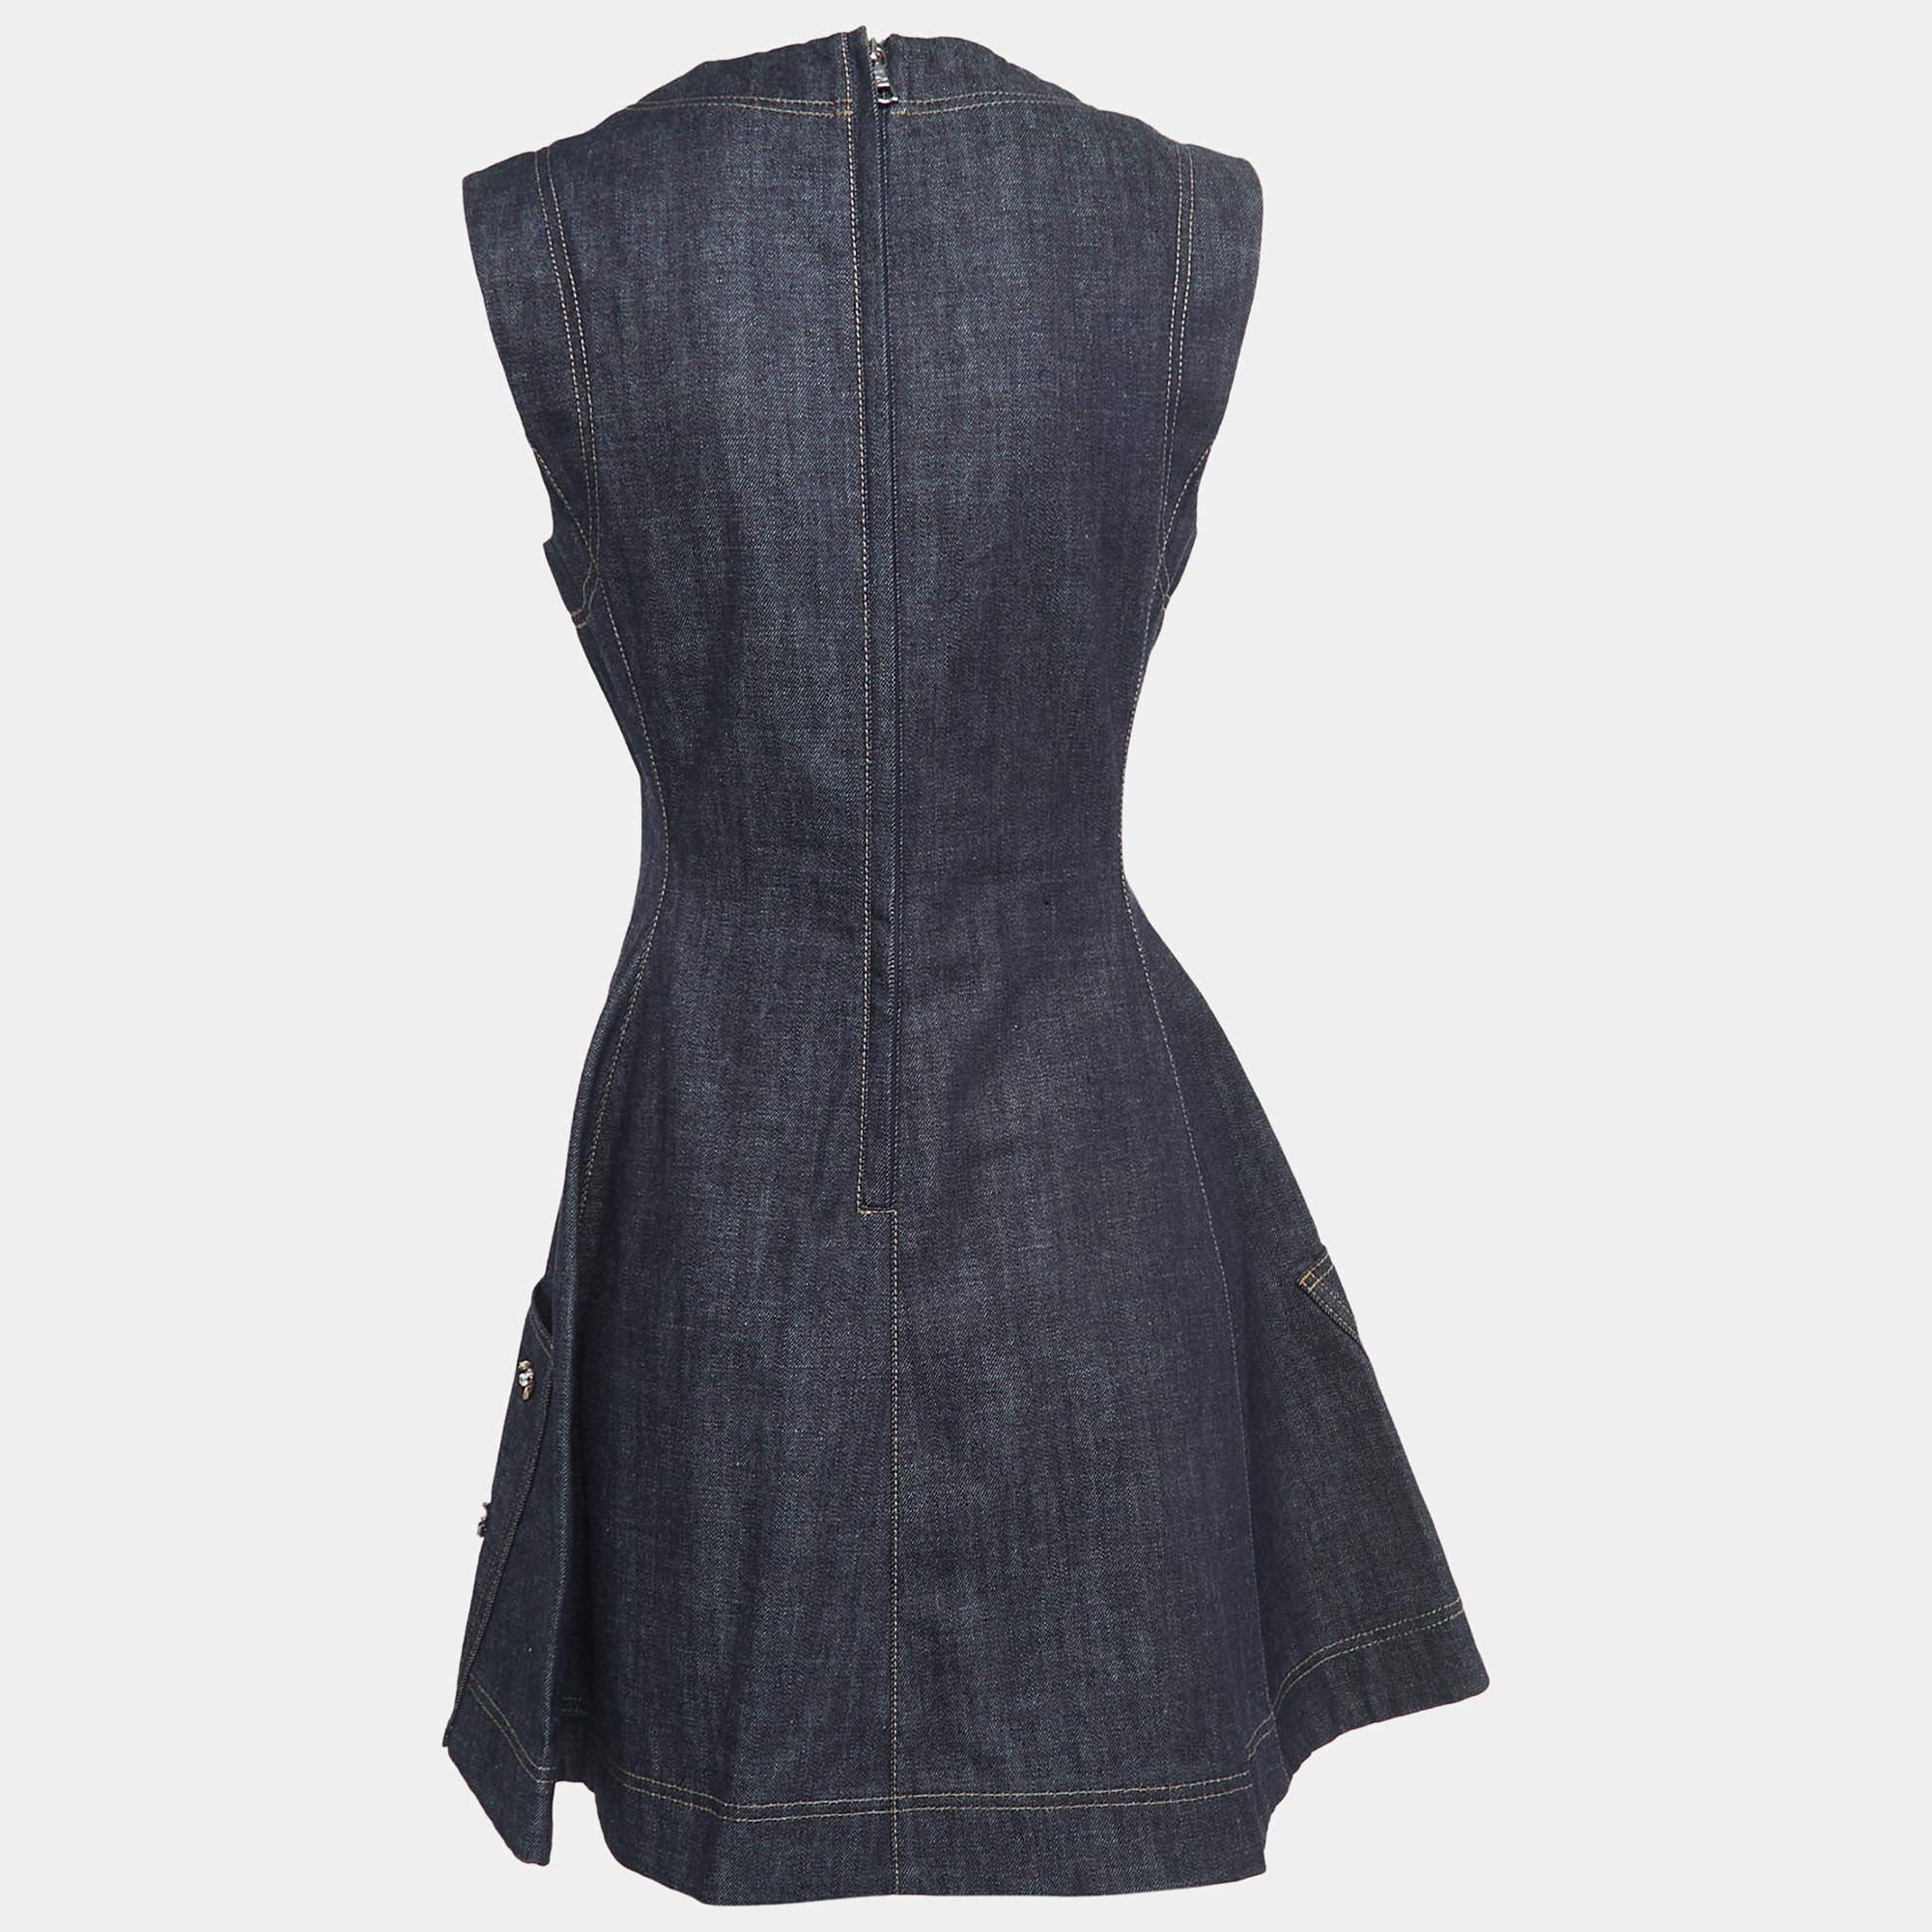 The Christian Dior dress effortlessly combines casual denim with glamorous accents. Featuring intricate embellishments, this sleeveless dress exudes a modern and playful charm, making it a stylish choice for any occasion.

